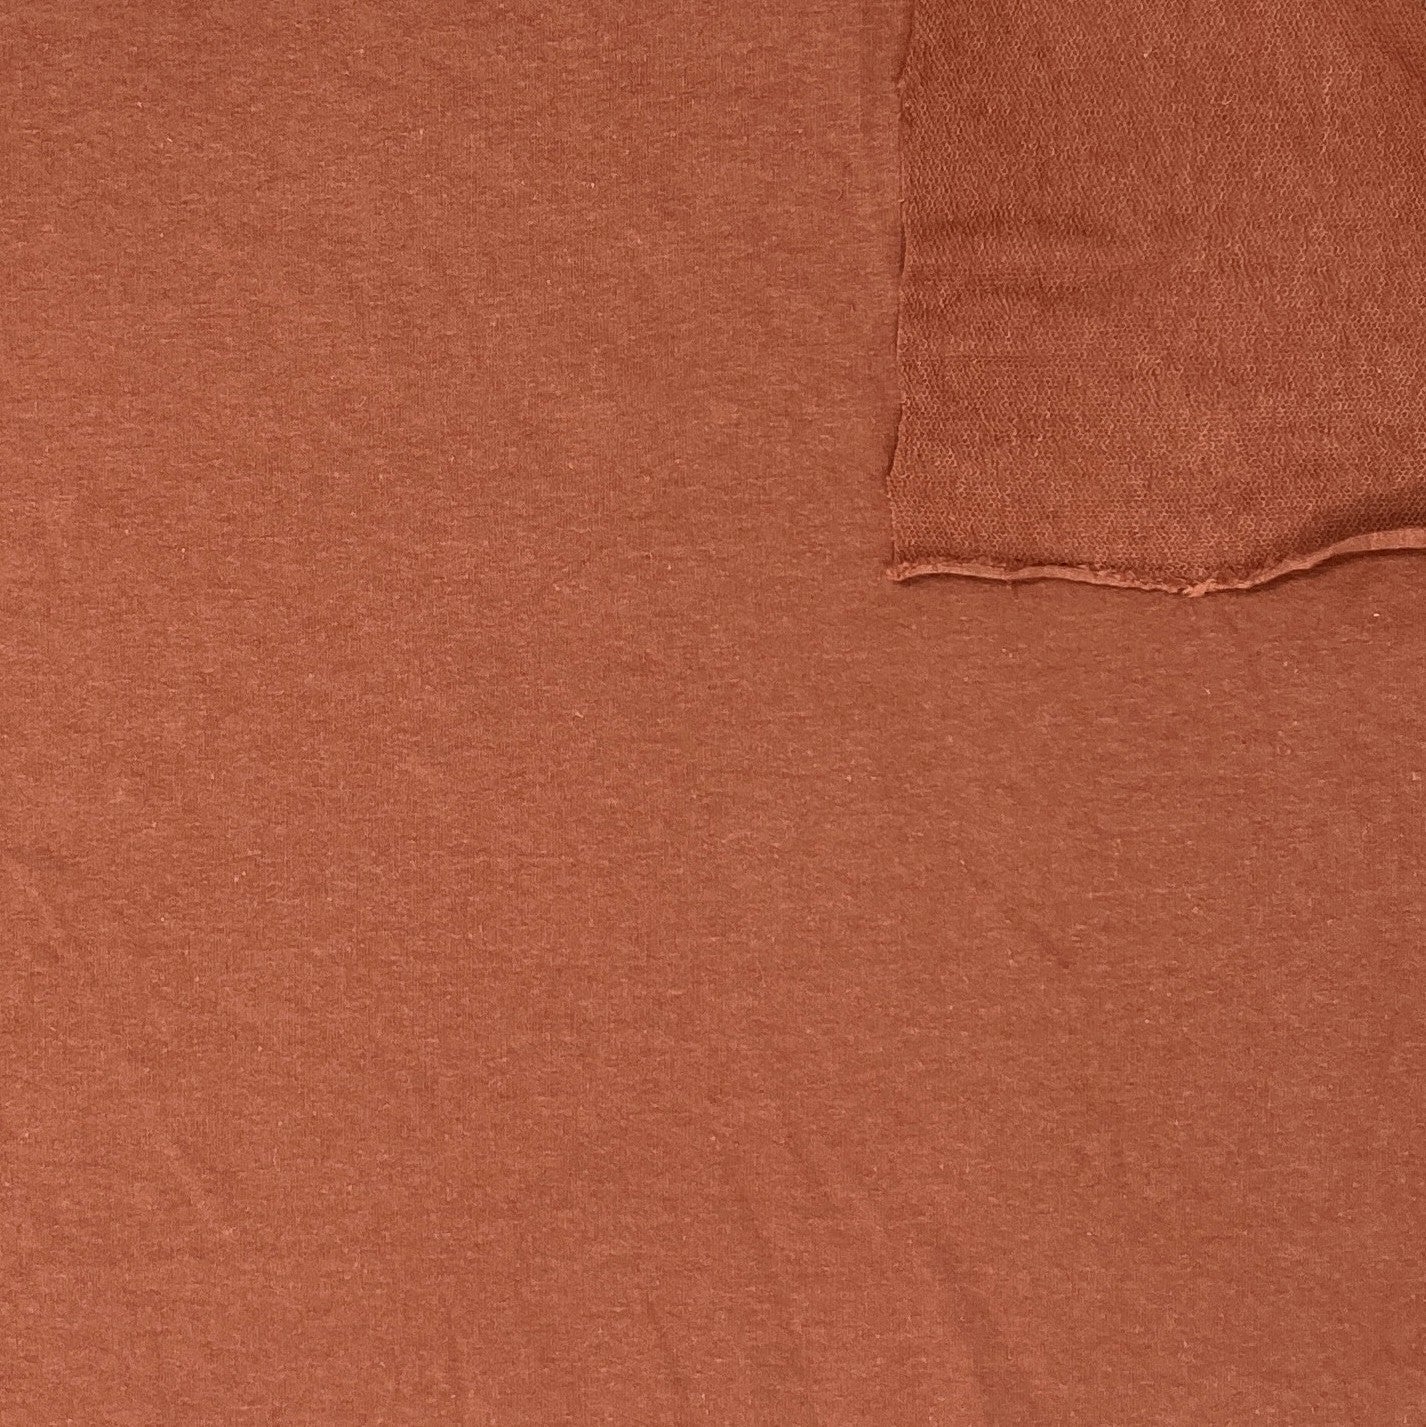 Solid Clay 4 Way Stretch French Terry Knit Fabric With Spandex Fabric, Raspberry Creek Fabrics, watermarked, restored